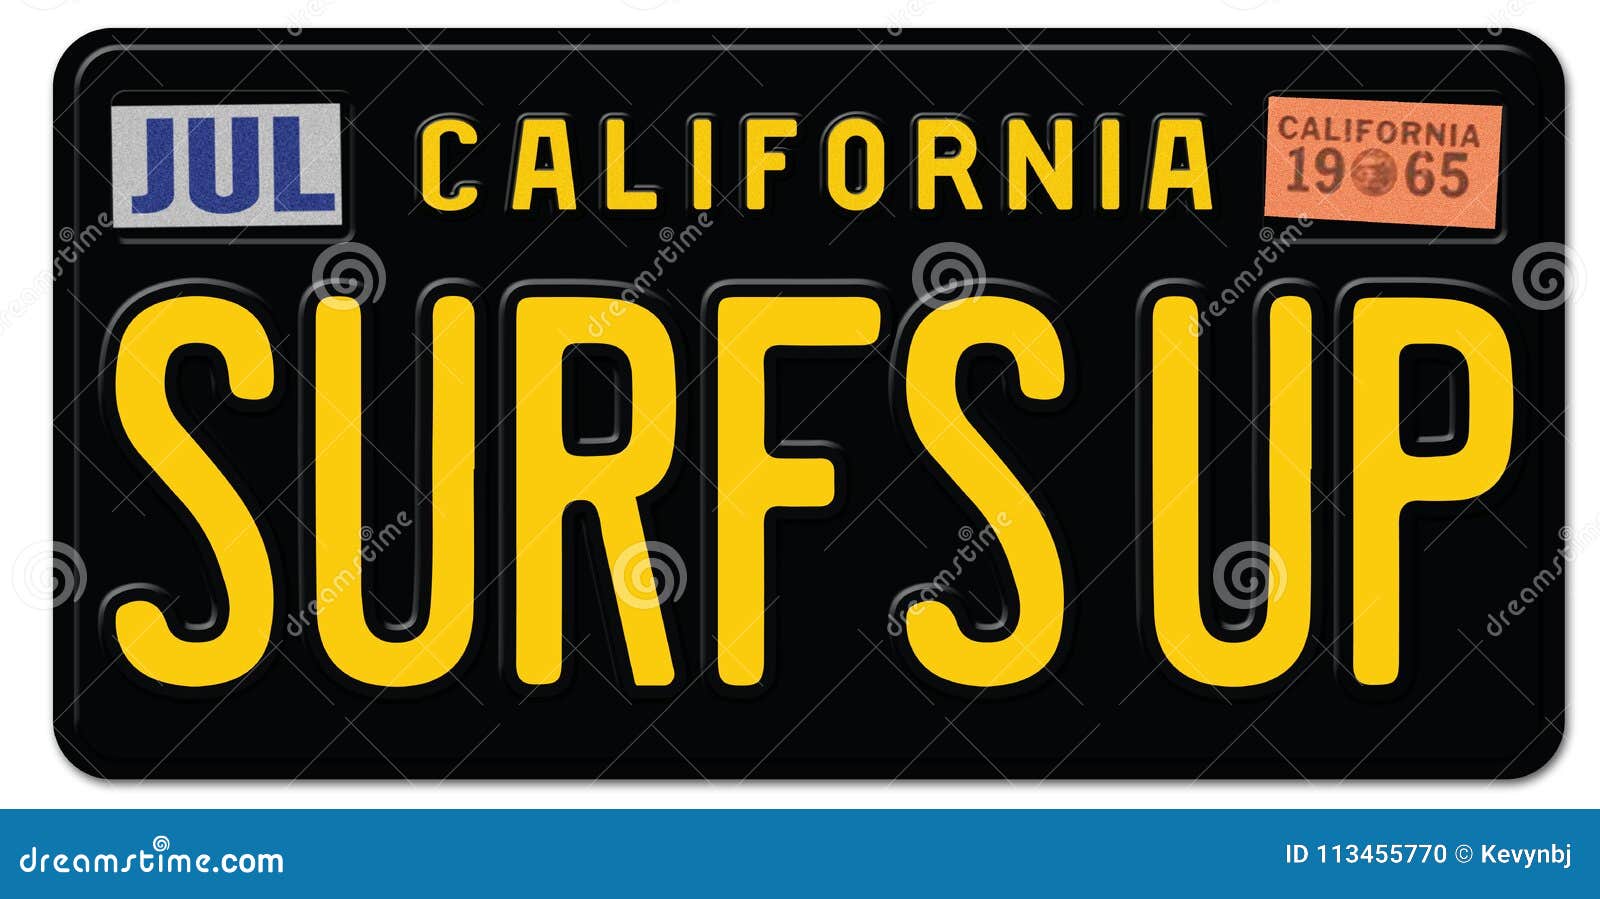 VINTAGE SIGN California License Plate State 20 x 16